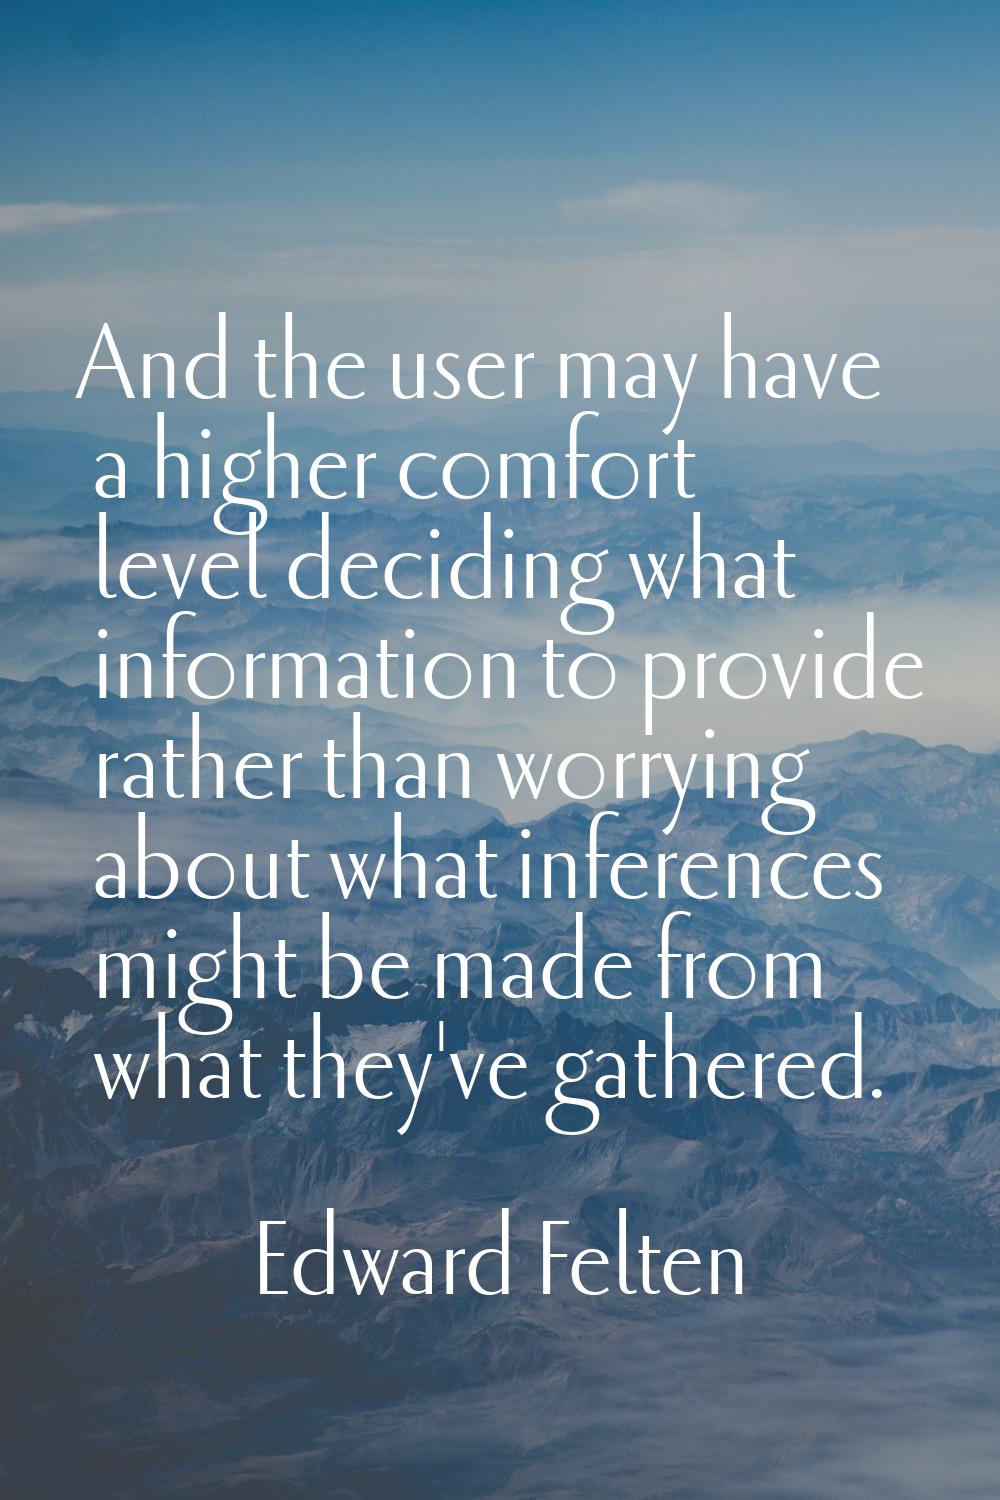 And the user may have a higher comfort level deciding what information to provide rather than worry